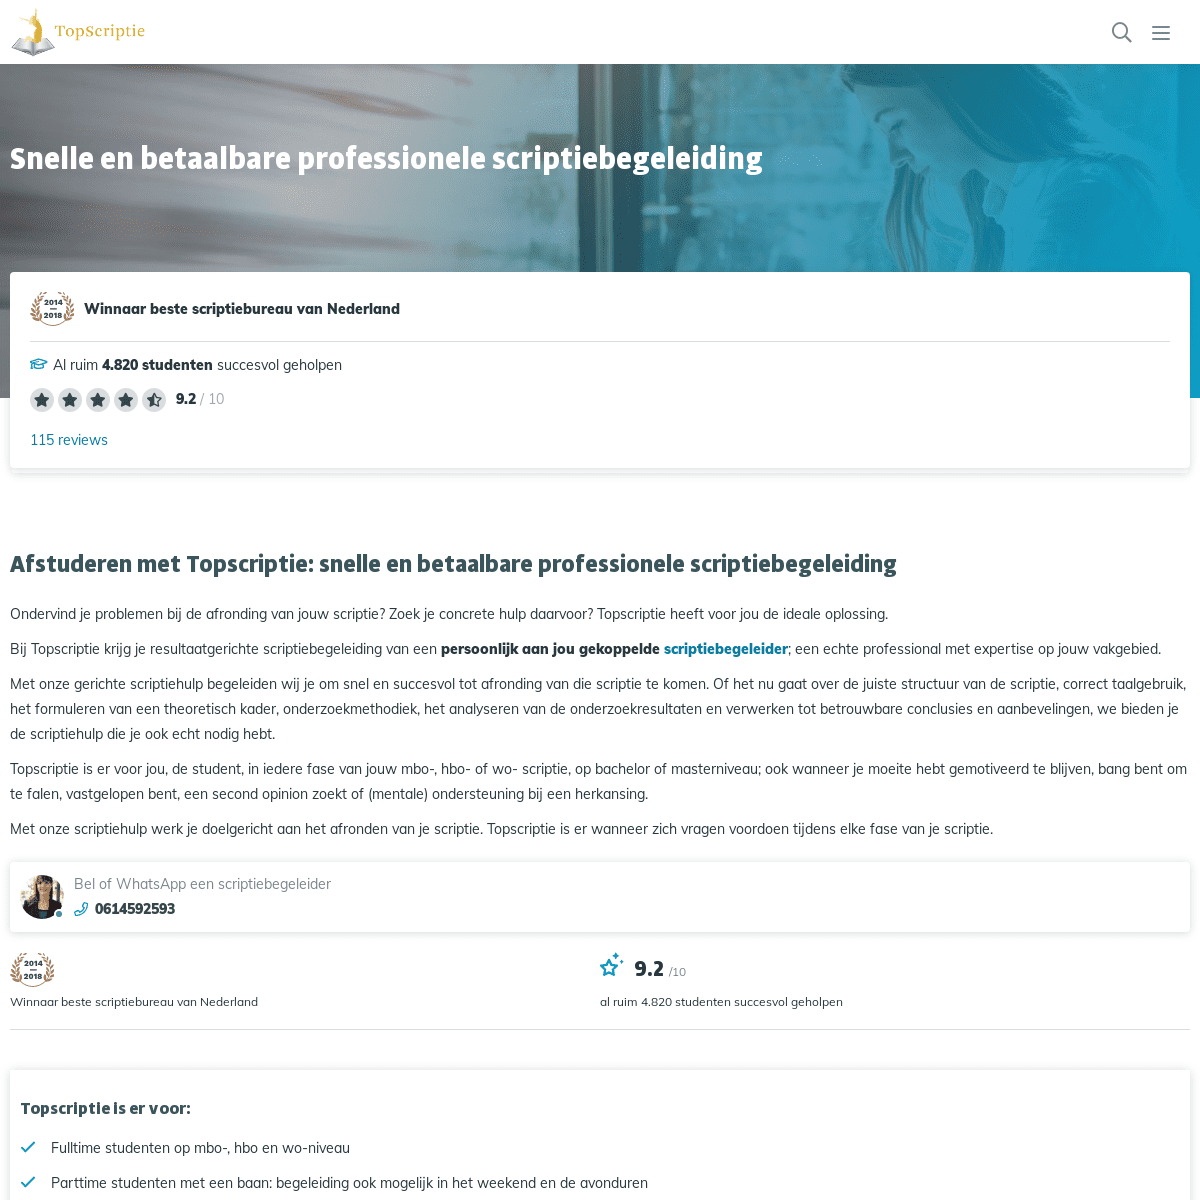 A complete backup of topscriptie.nl